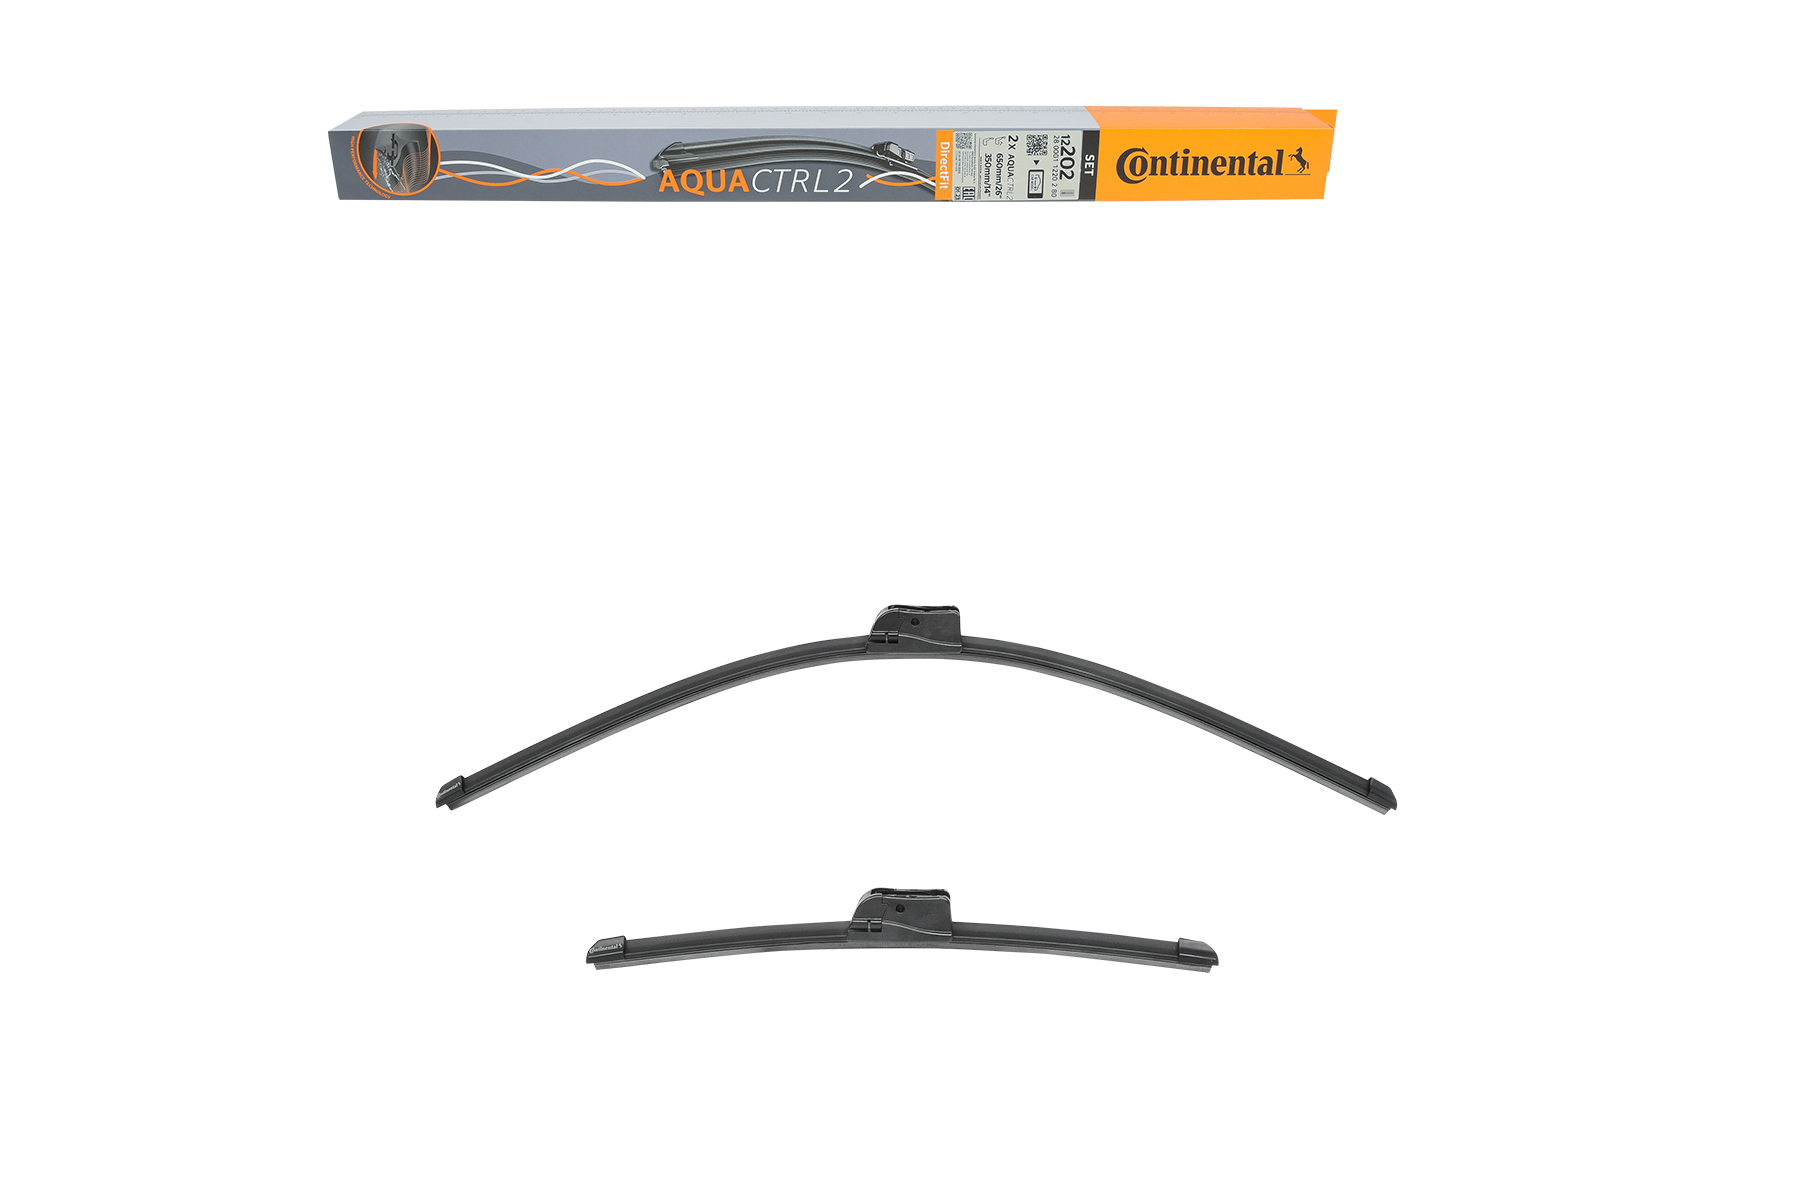 2800011220280 Continental Windscreen wipers KIA 650, 350 mm Front, Flat wiper blade, with spoiler, 26/14 Inch